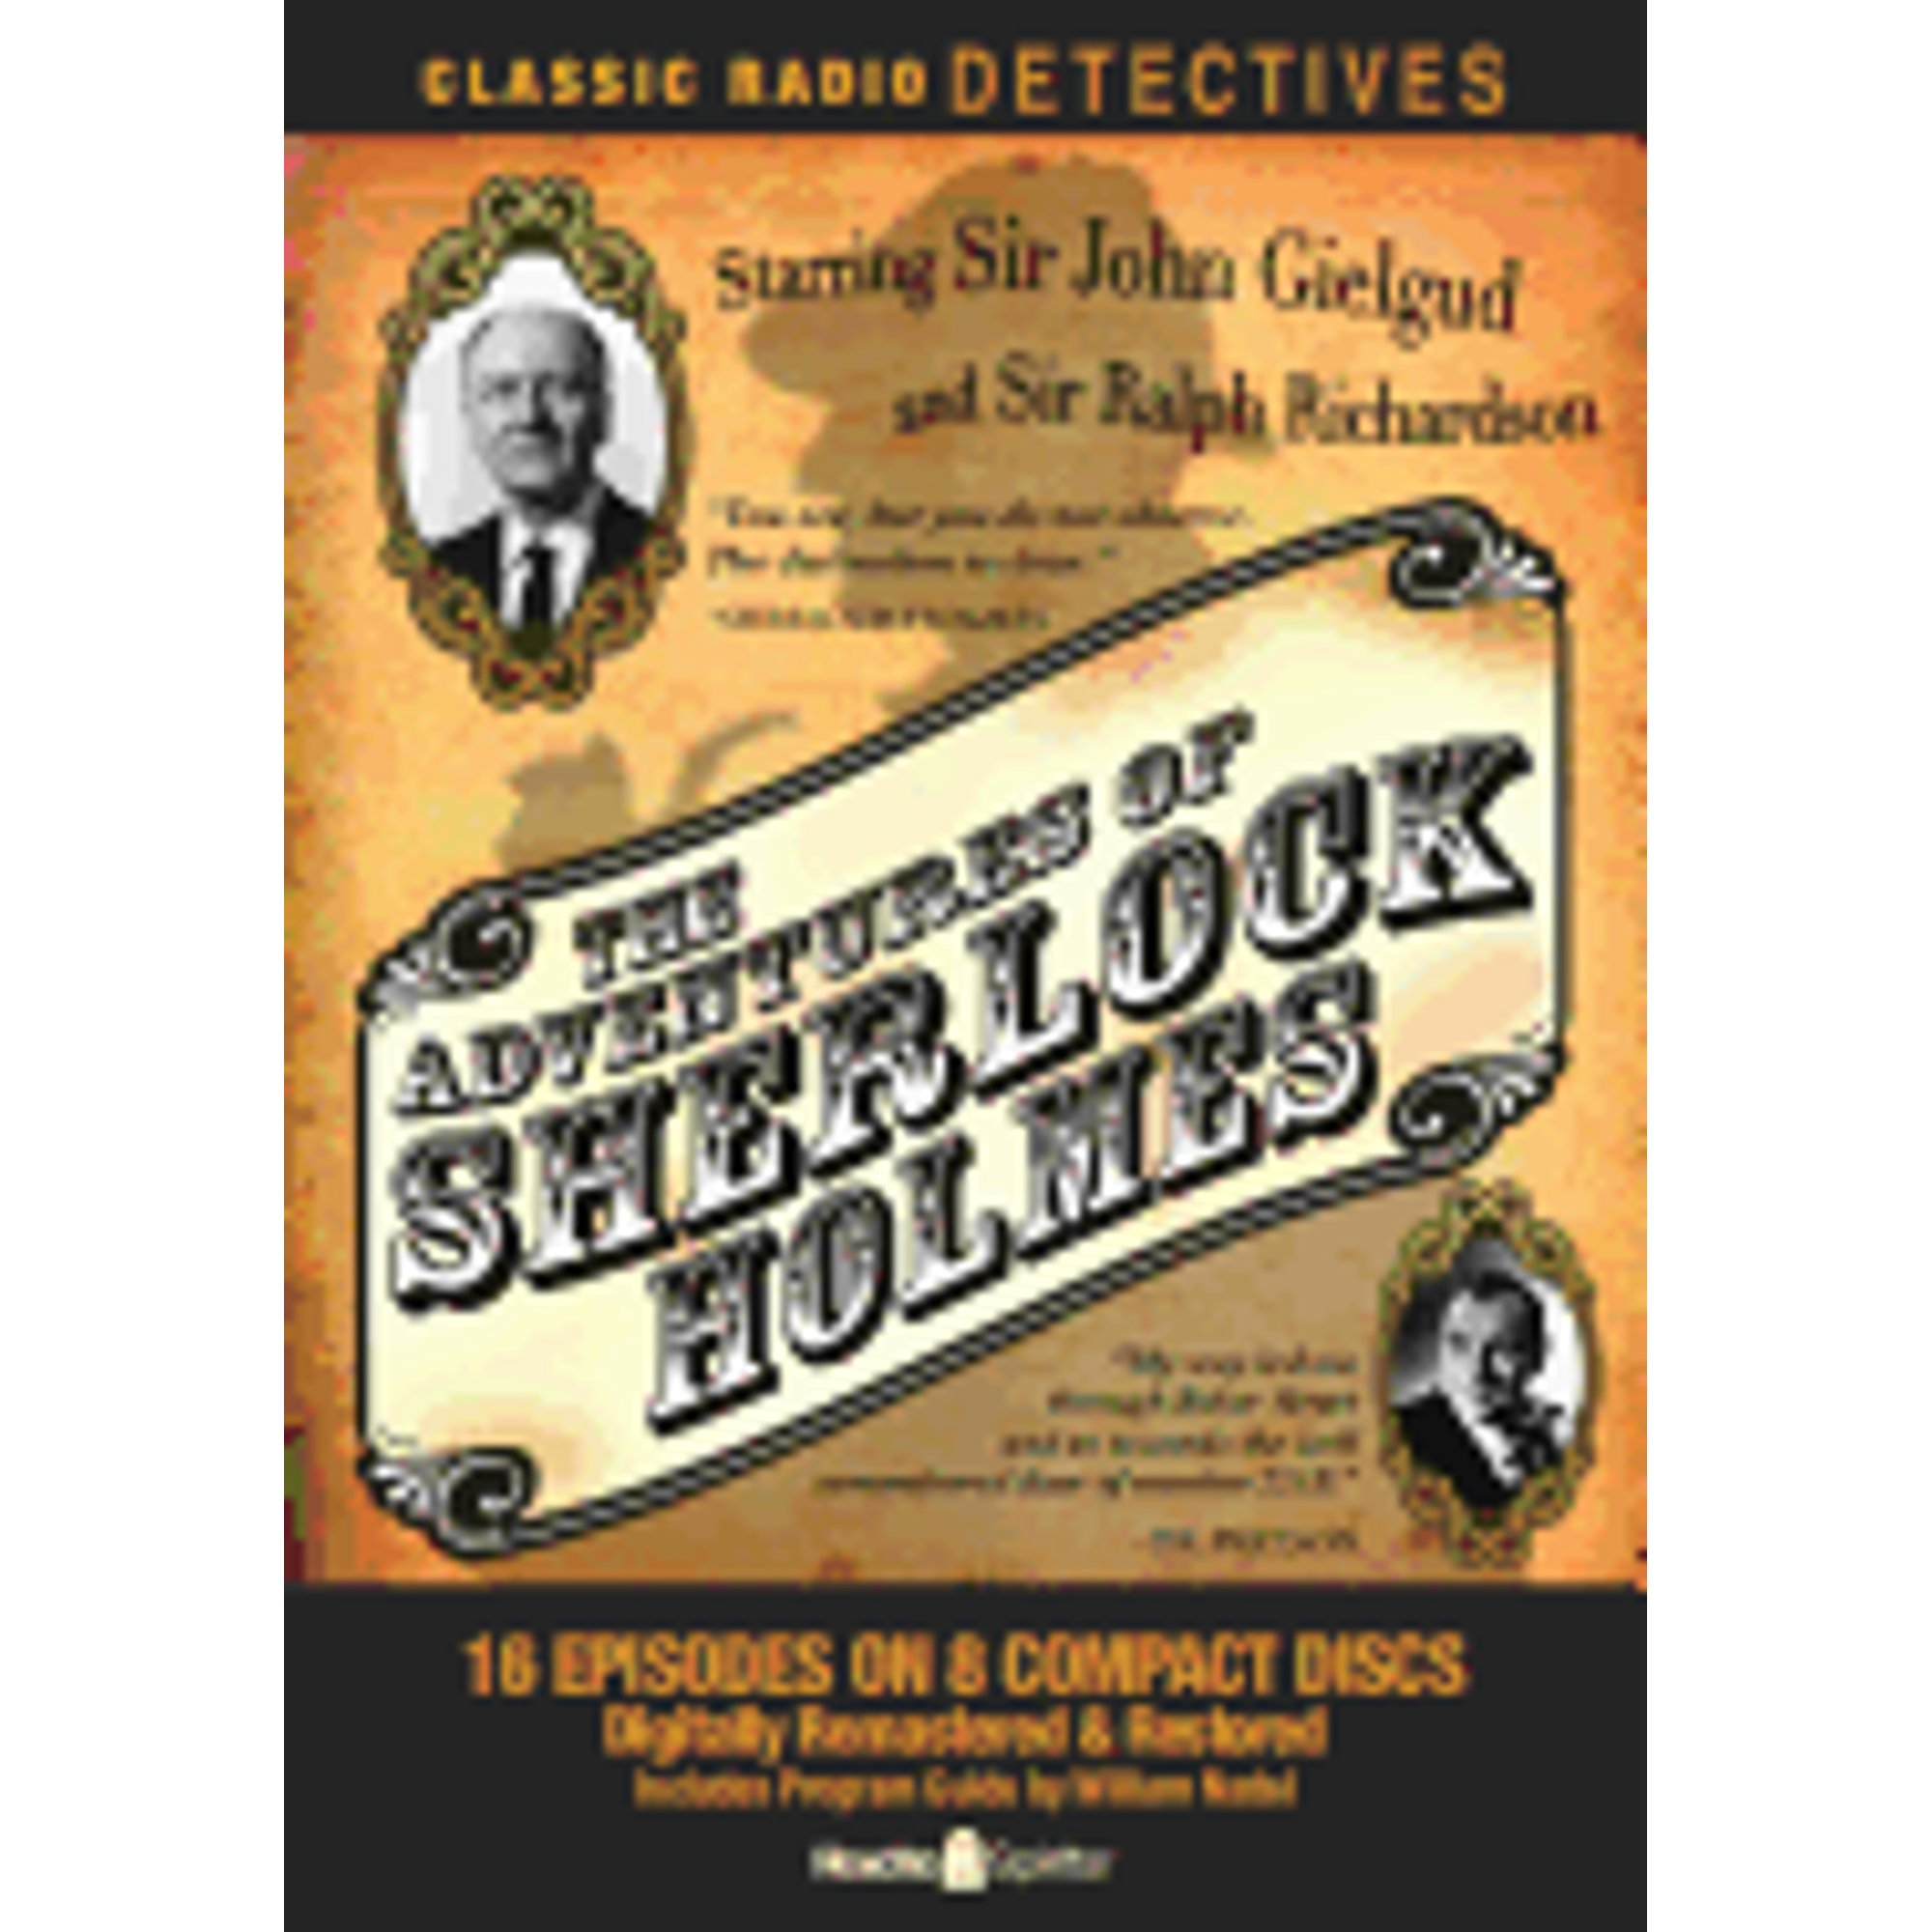 Pre-Owned The Adventures of Sherlock Holmes (Audiobook) by Sir John Gielgud, Dr. Ralph Richardson, William Nadel - image 1 of 1